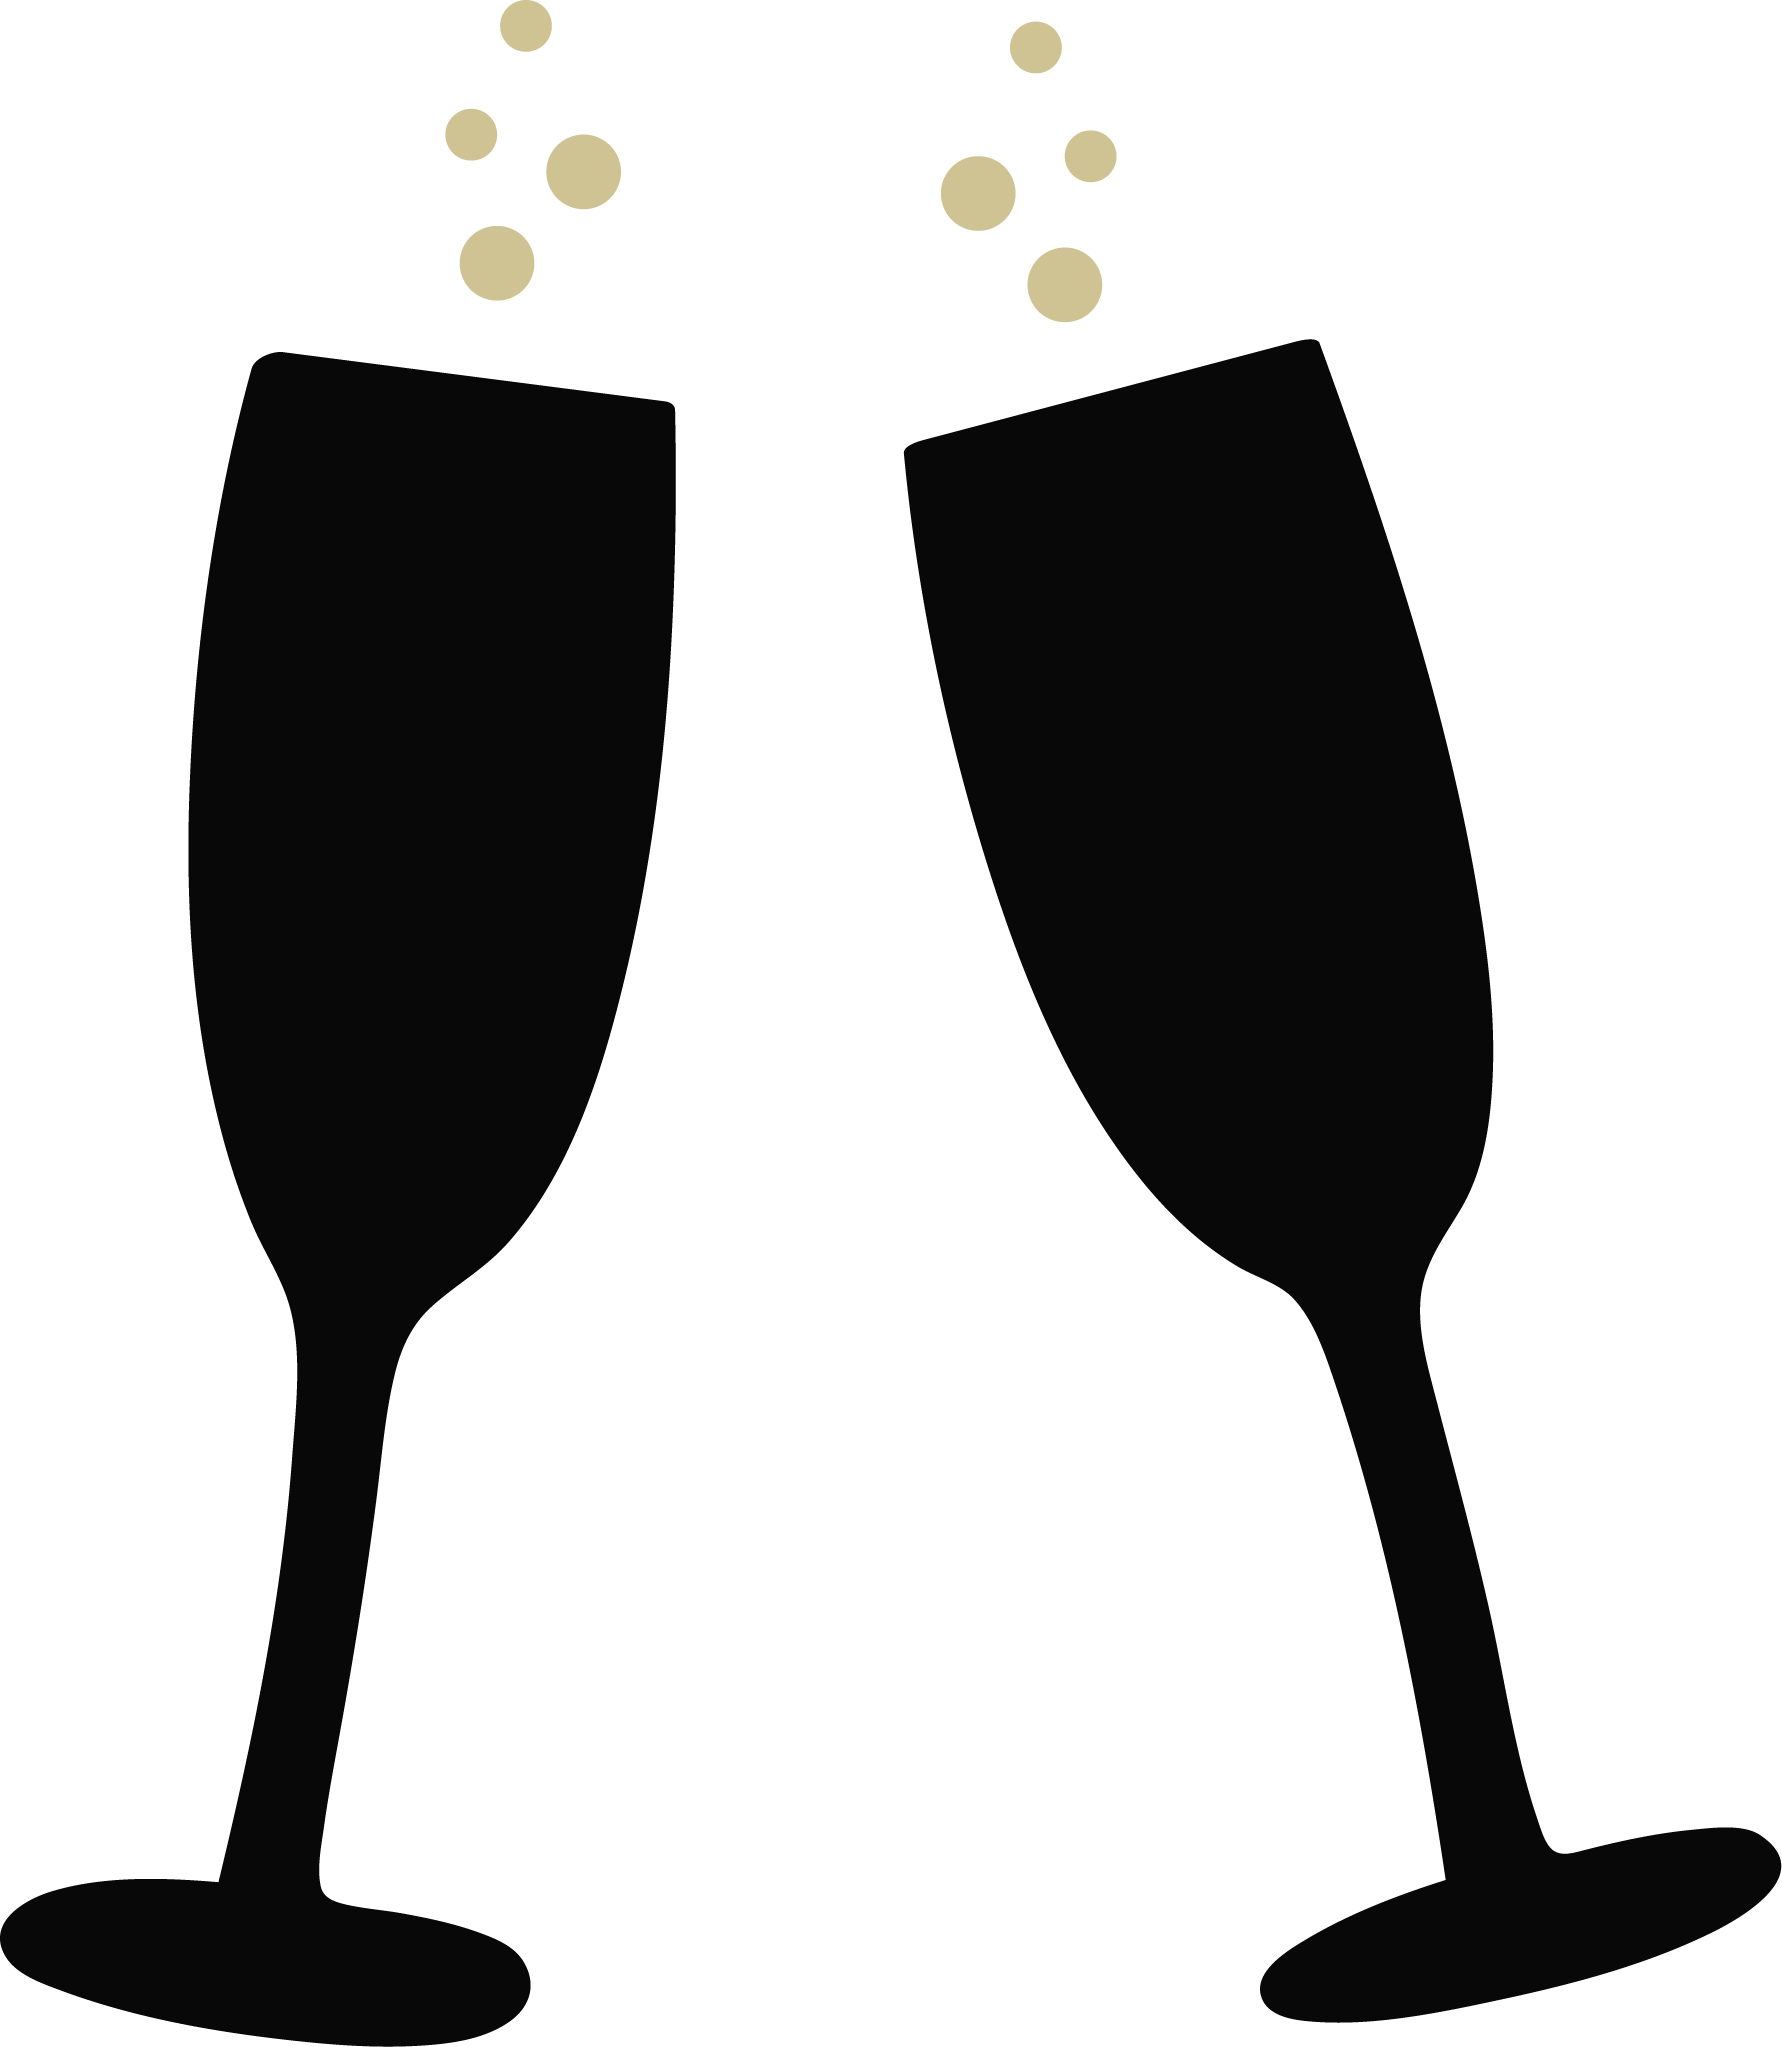 Toasting Champagne Glasses. Host Your Wedding or Private Event at the Champagne Barn in Mid-Missouri